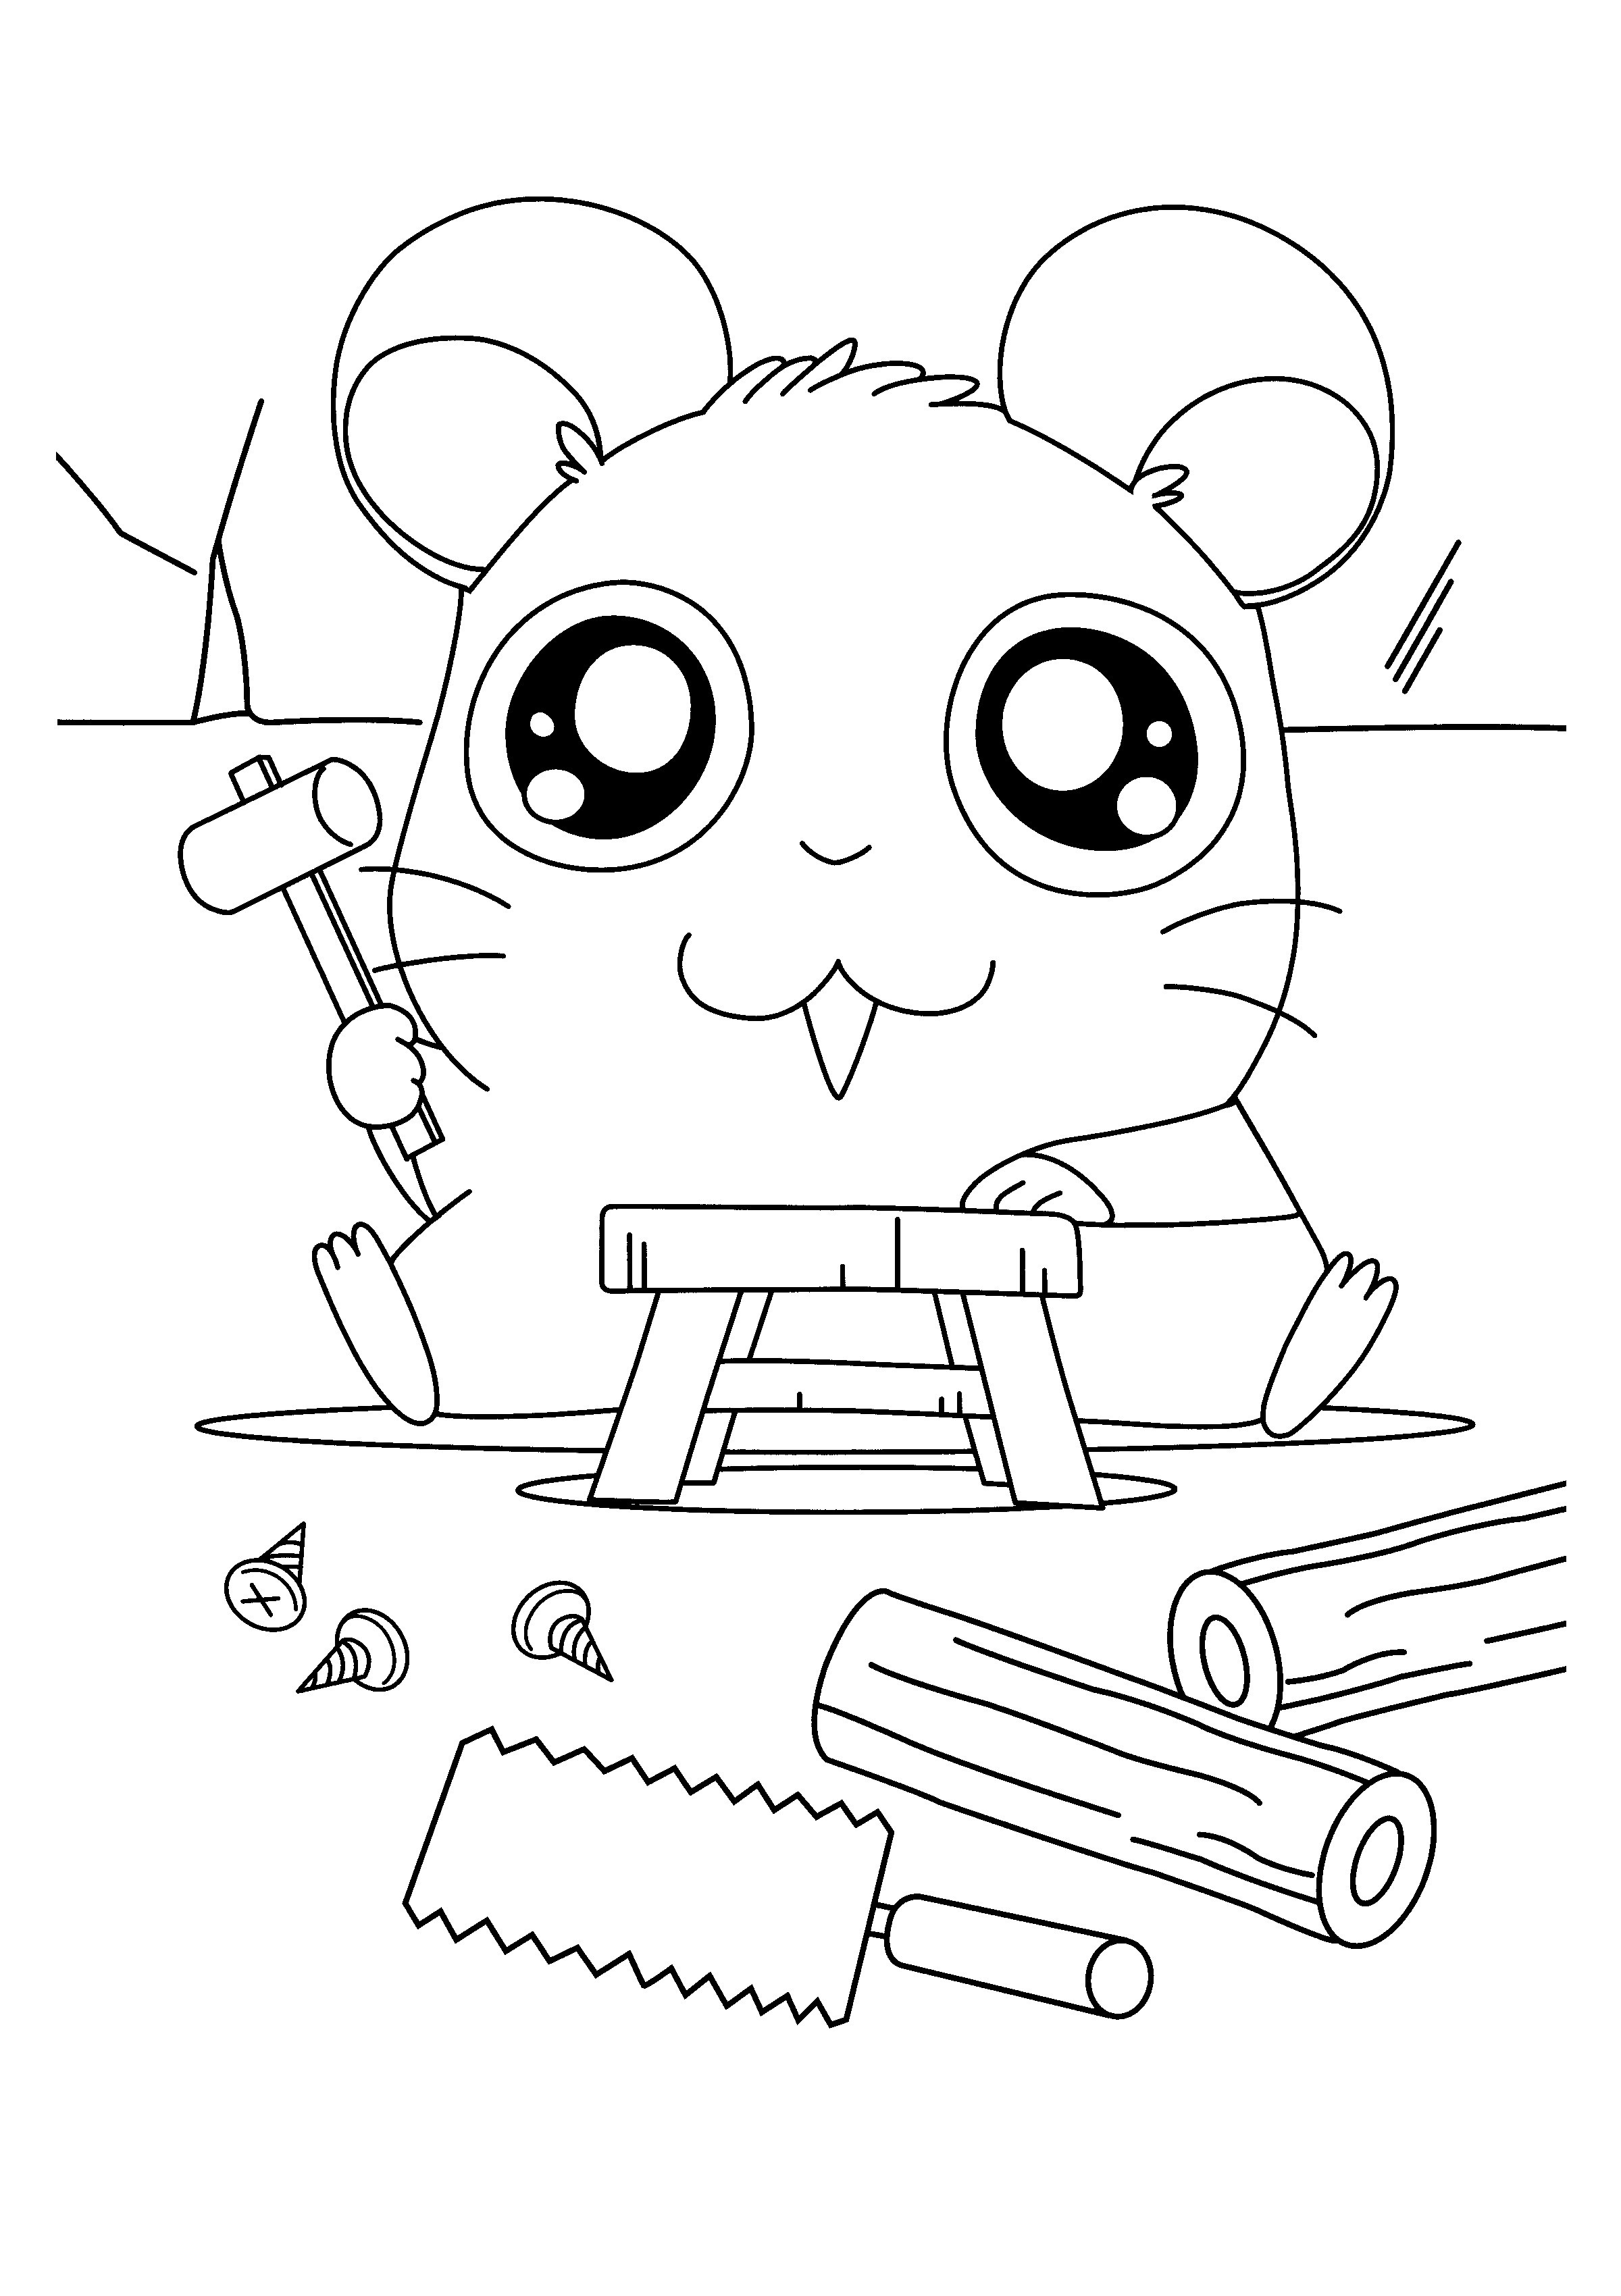 Hamtaro Coloring Pages , HD Wallpaper & Backgrounds